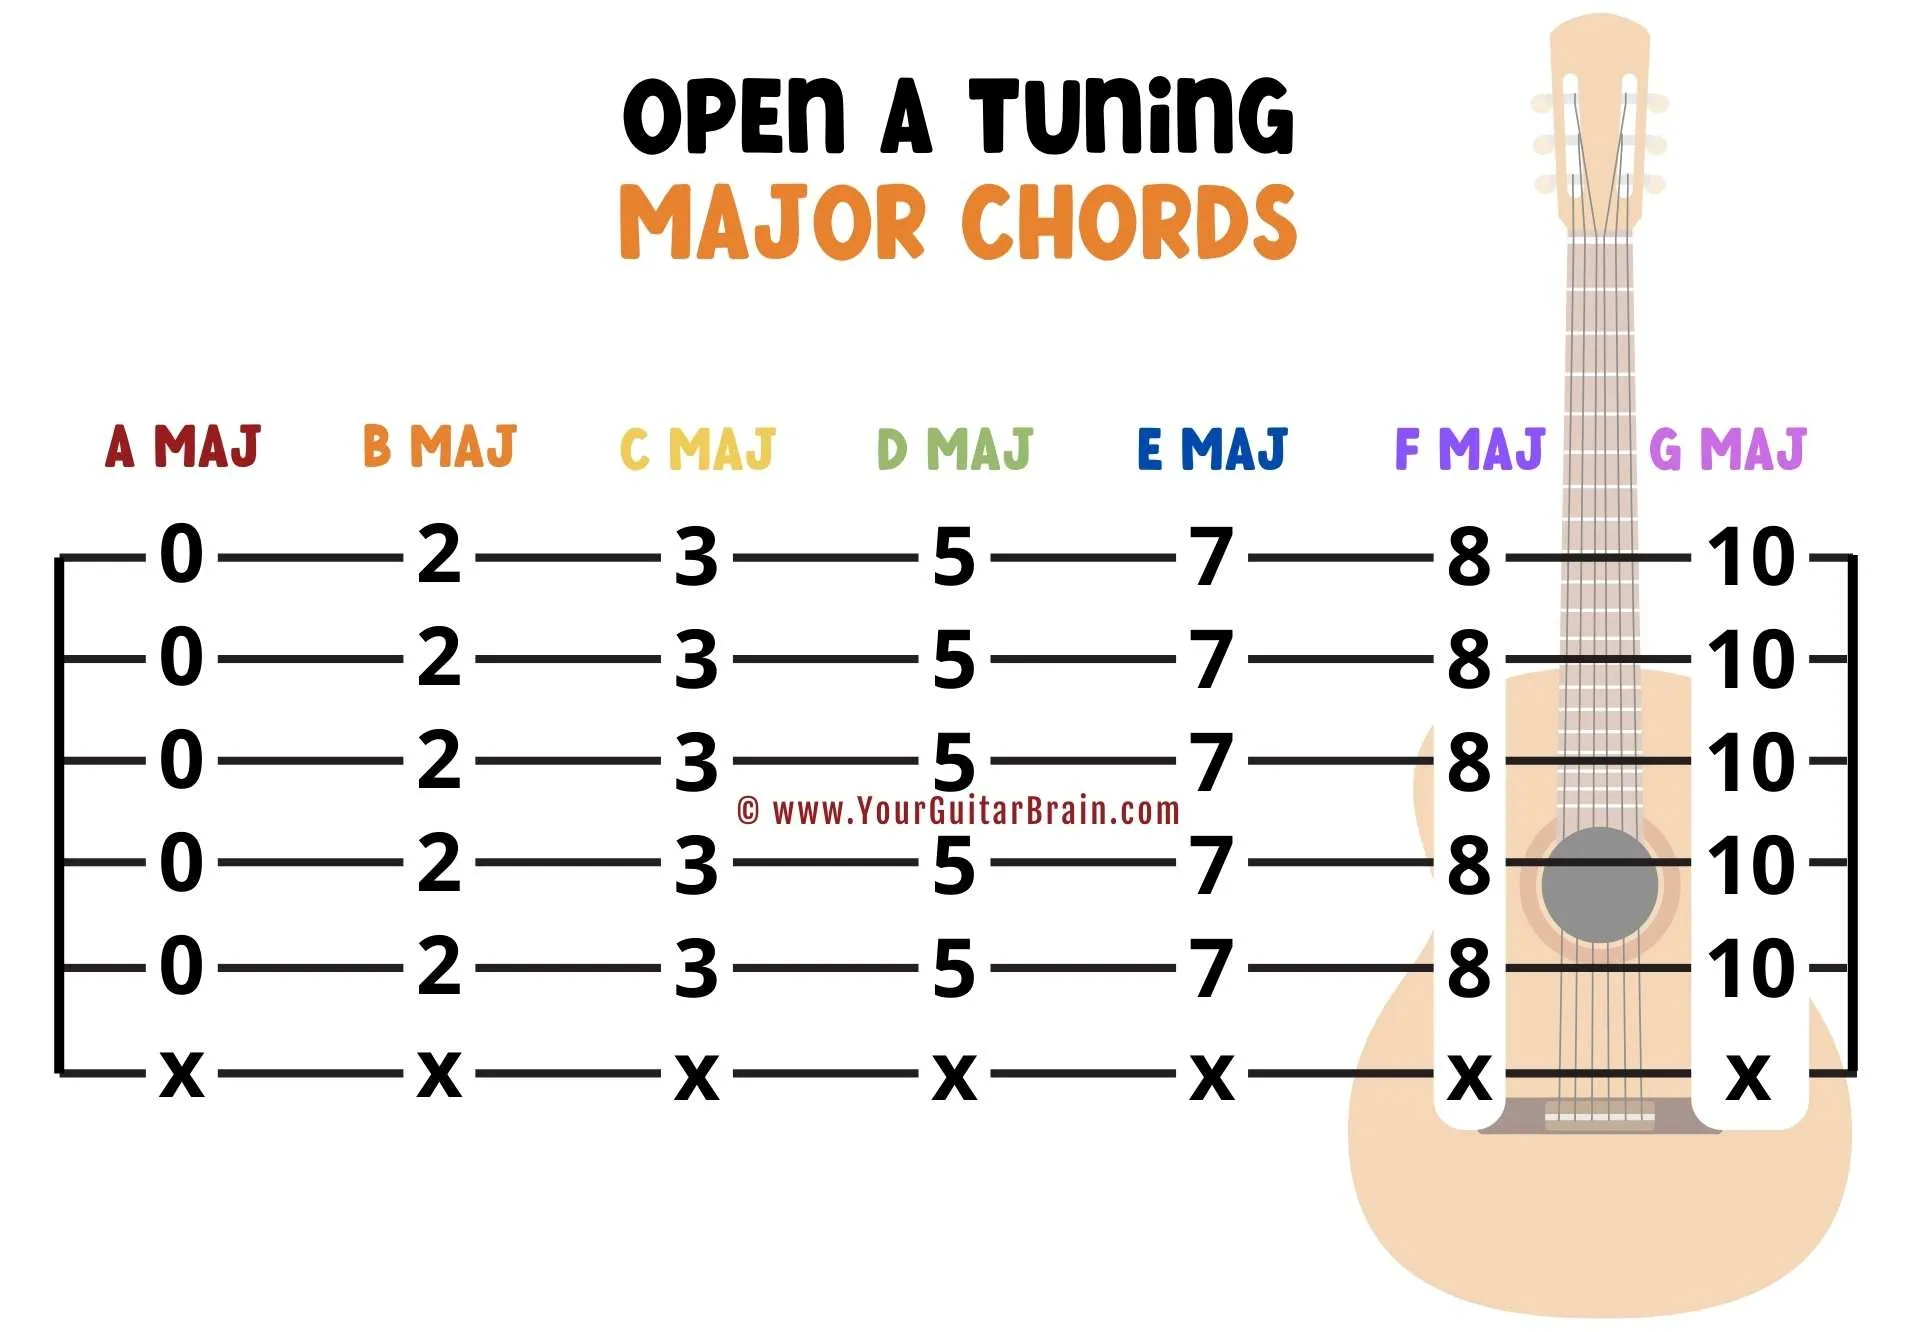 Open A Tuning Chords chart